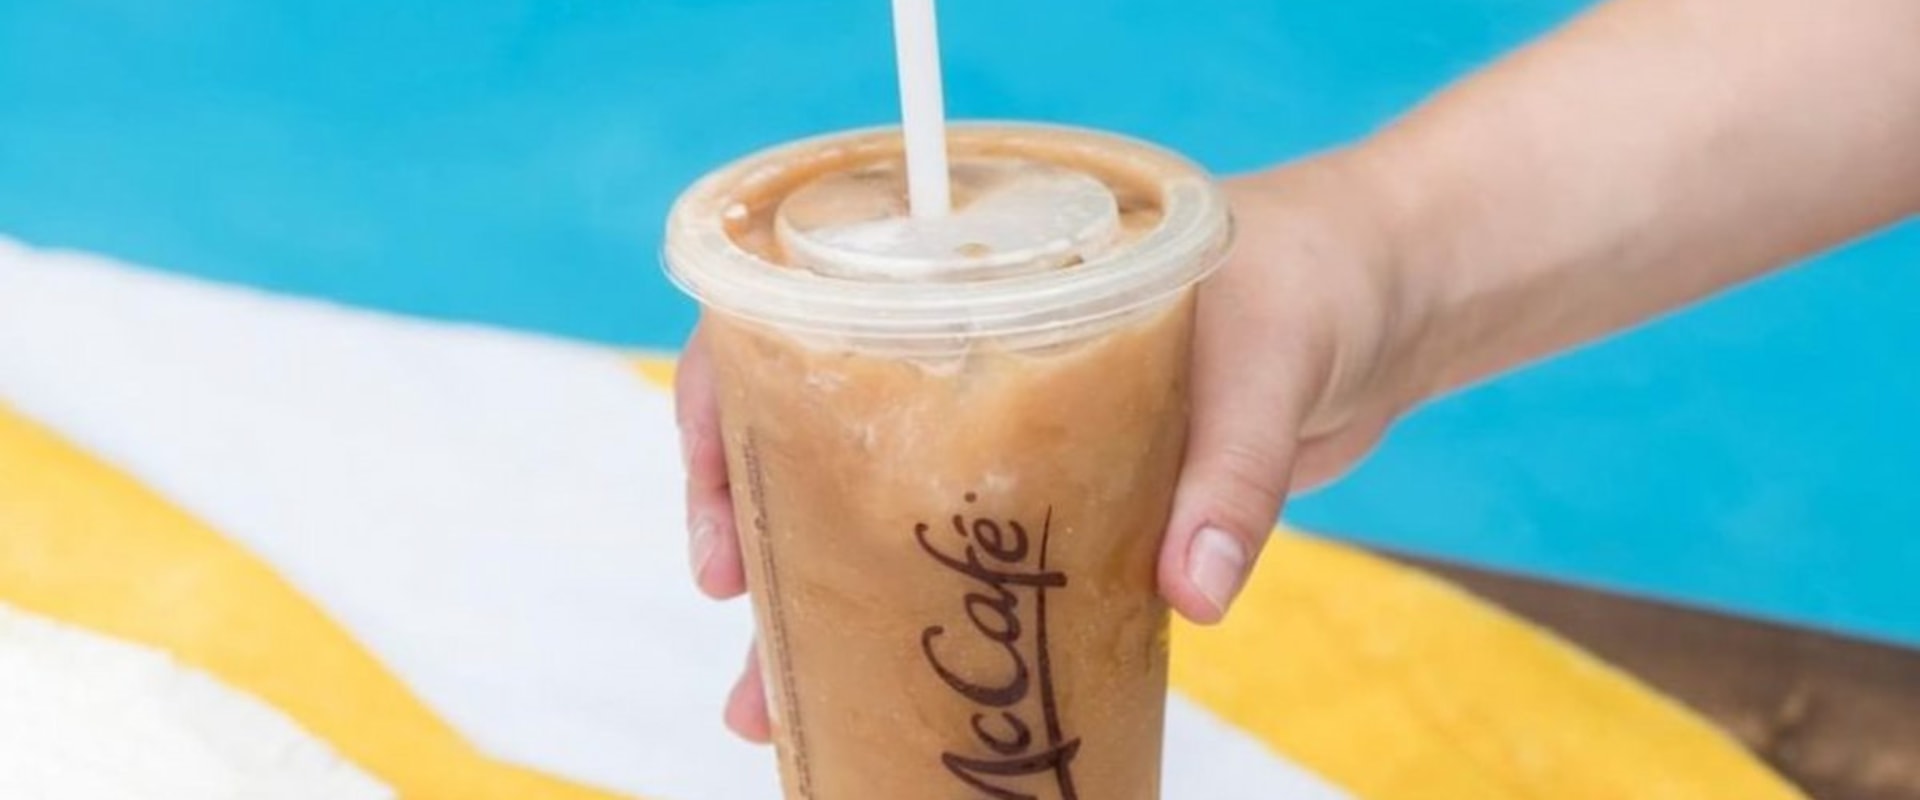 How Much Caffeine is in McDonald's Coffee?